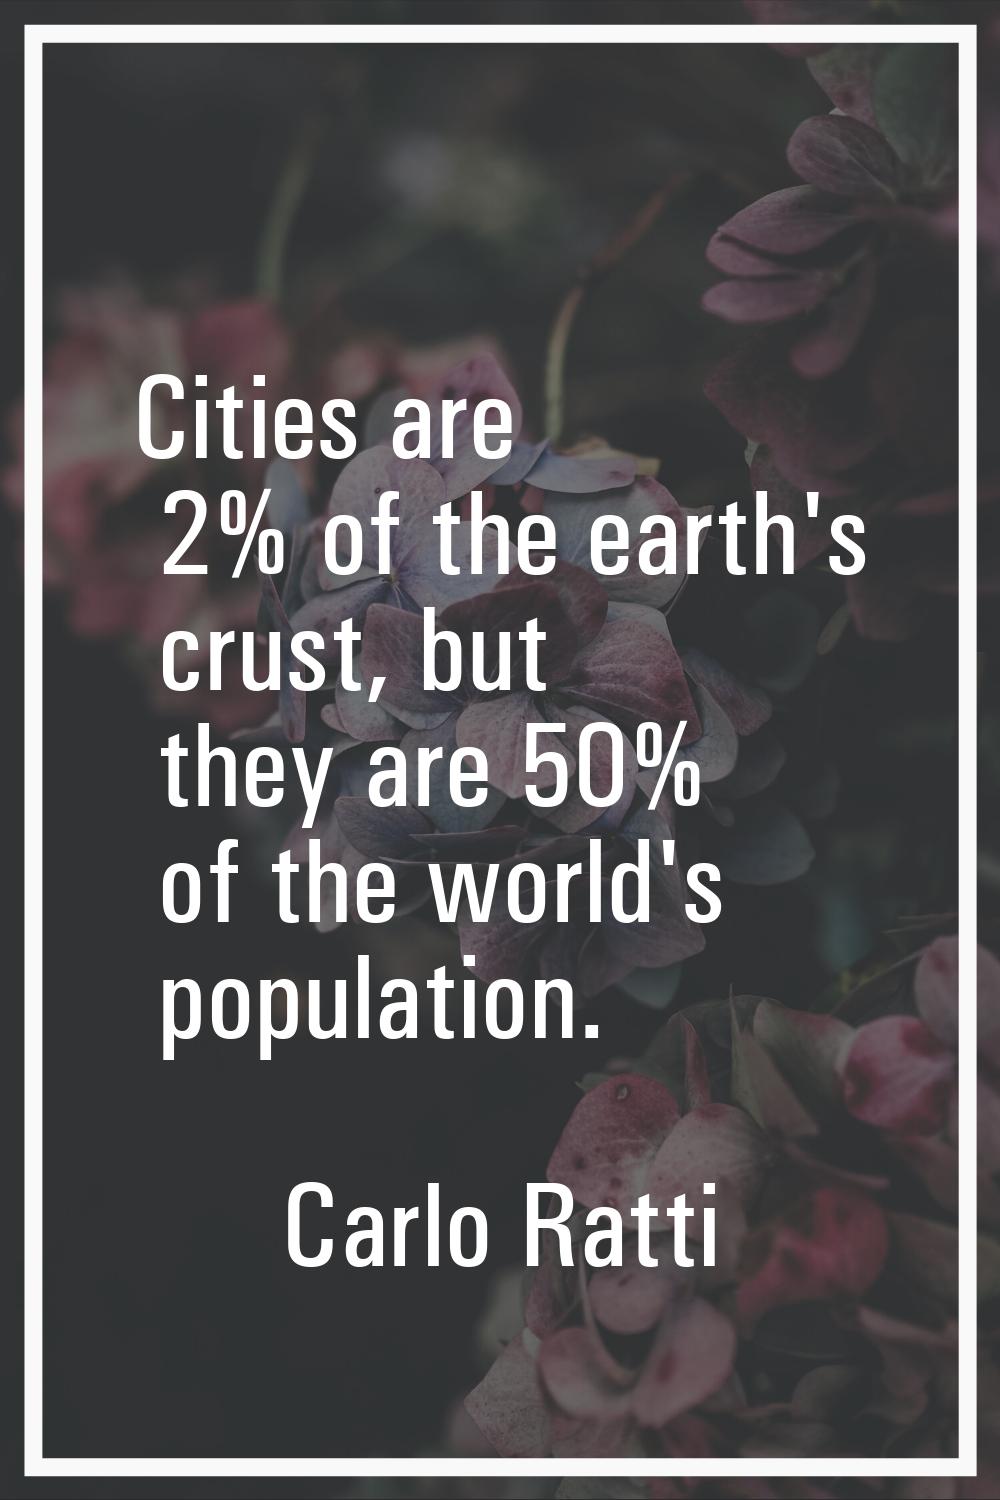 Cities are 2% of the earth's crust, but they are 50% of the world's population.